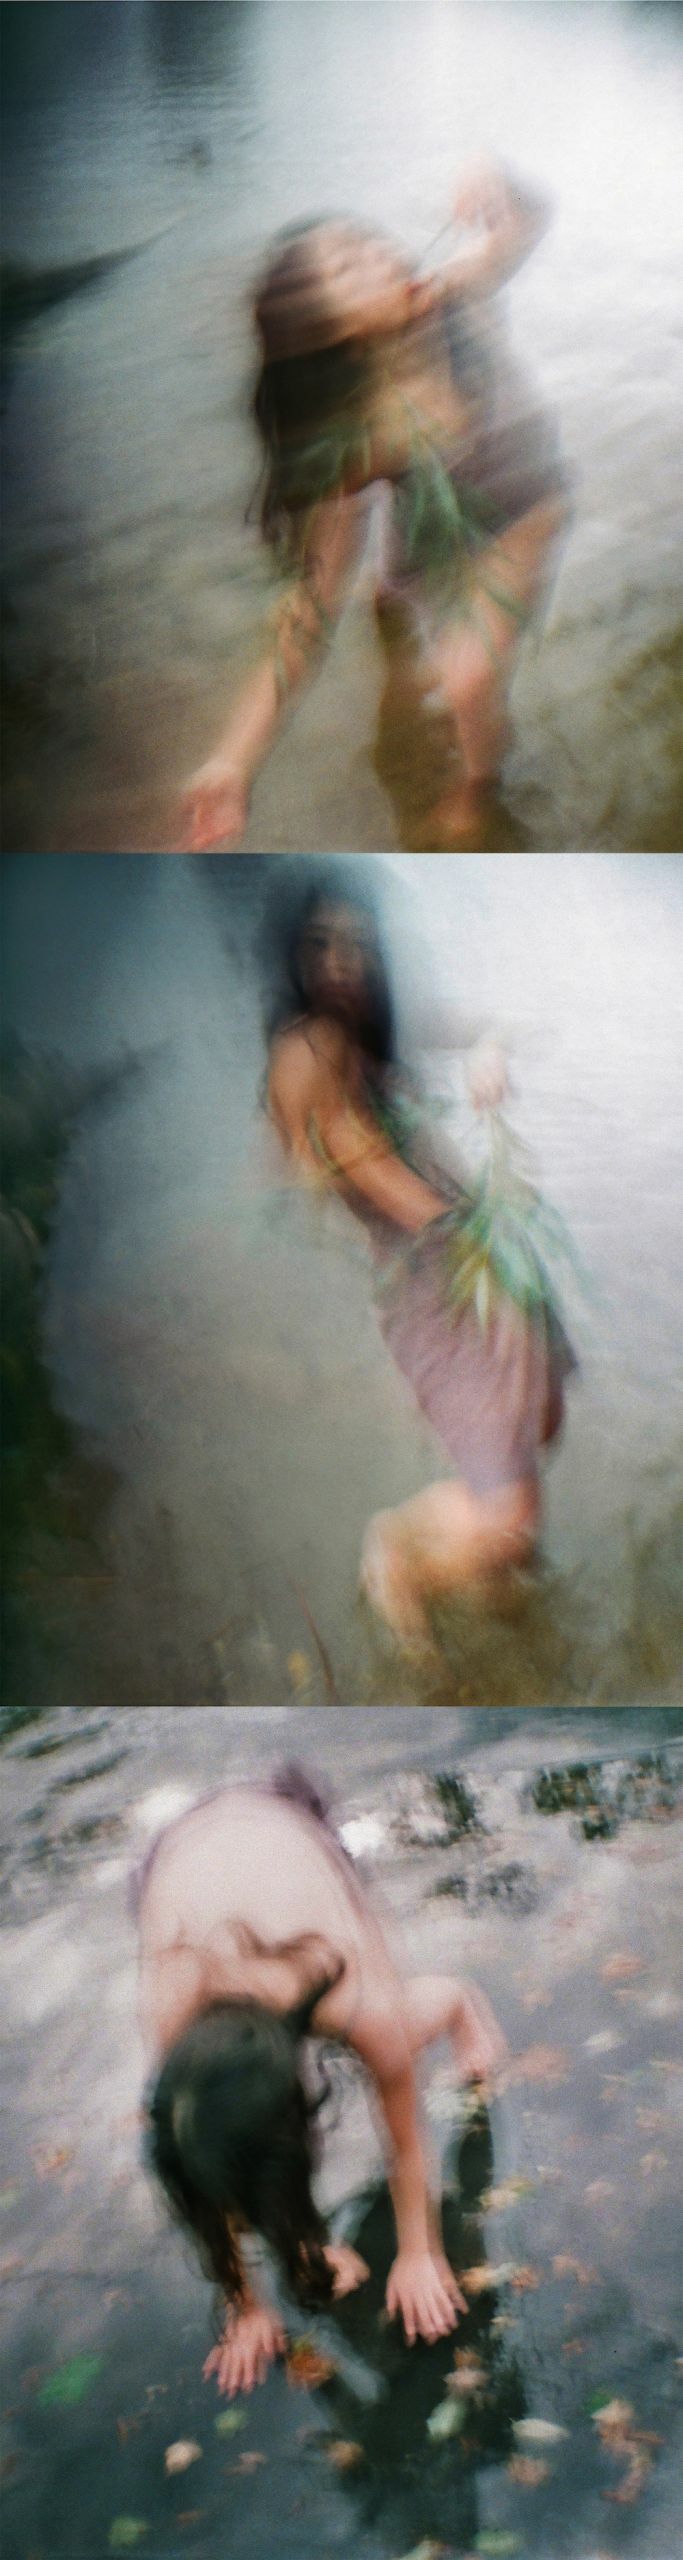 I want to be blurred and faded 04 - a Photographic Art by Karin Shikata